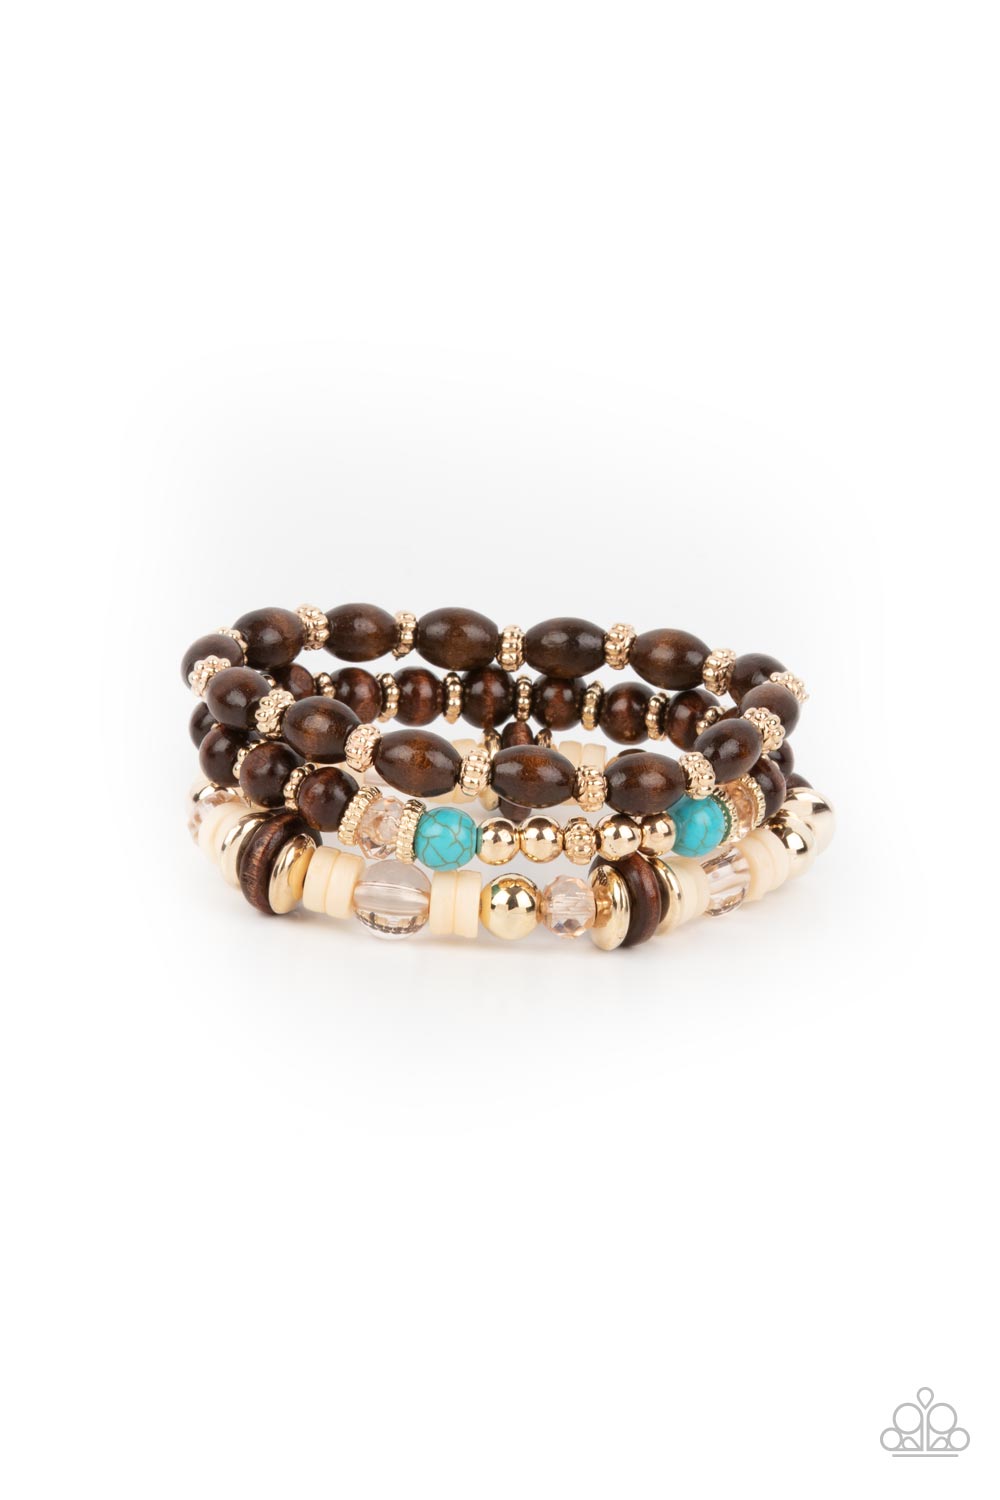 &lt;P&gt; A mismatched collection of brown wooden beads, gold accents, turquoise stones, and glassy beads are threaded along stretchy bands, creating colorful layers around the wrist.&lt;/P&gt;

&lt;P&gt;&lt;I&gt; Sold as one set of three bracelets.  &lt;/I&gt;&lt;/p&gt;


&lt;img src=\&quot;https://d9b54x484lq62.cloudfront.net/paparazzi/shopping/images/517_tag150x115_1.png\&quot; alt=\&quot;New Kit\&quot; align=\&quot;middle\&quot; height=\&quot;50\&quot; width=\&quot;50\&quot;/&gt;